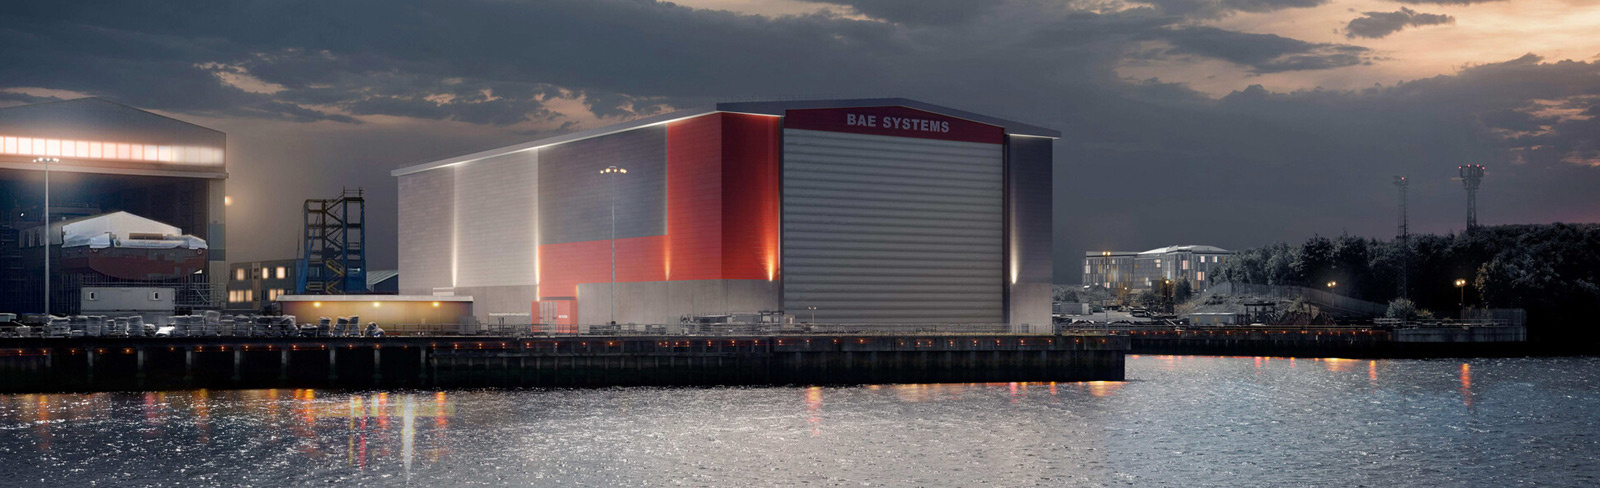 Work starts on state-of-the-art shipbuilding facility in Glasgow